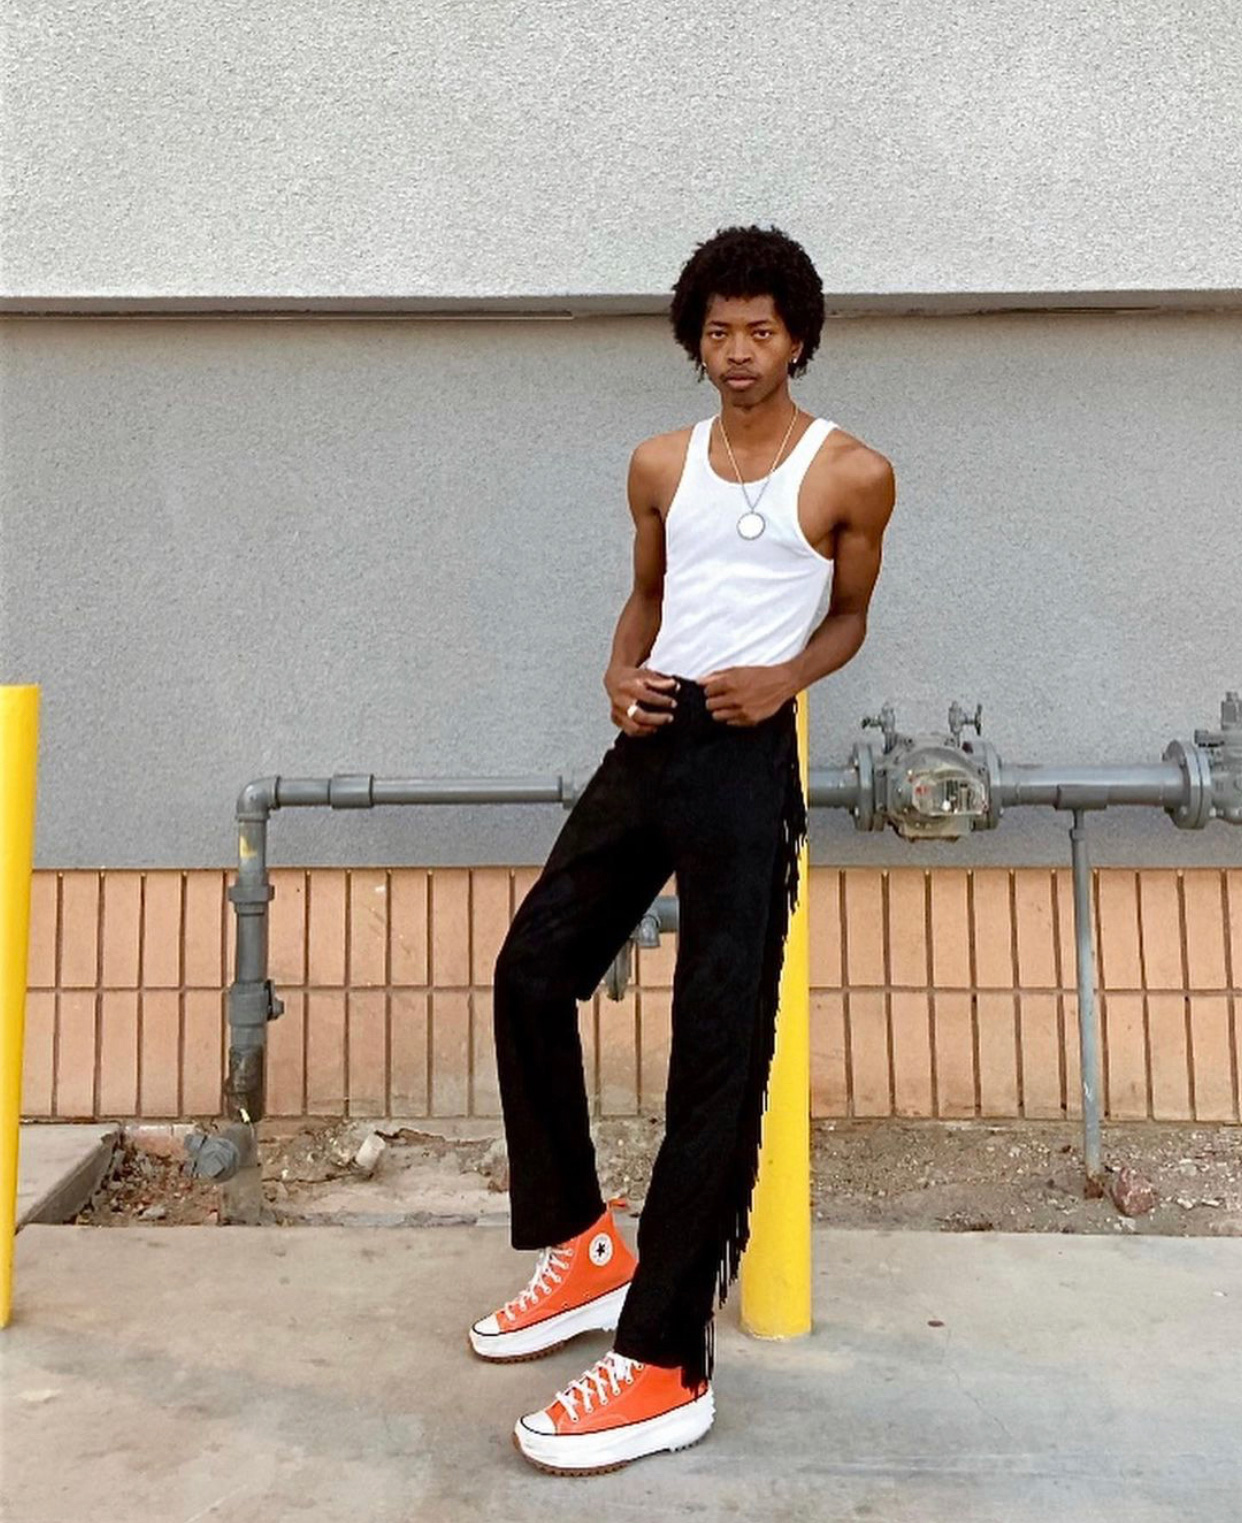 a slim man leans against a pole in a parking lot wearing a white tank top, black pants with fringe down the legs and orange platform Converse sneakers